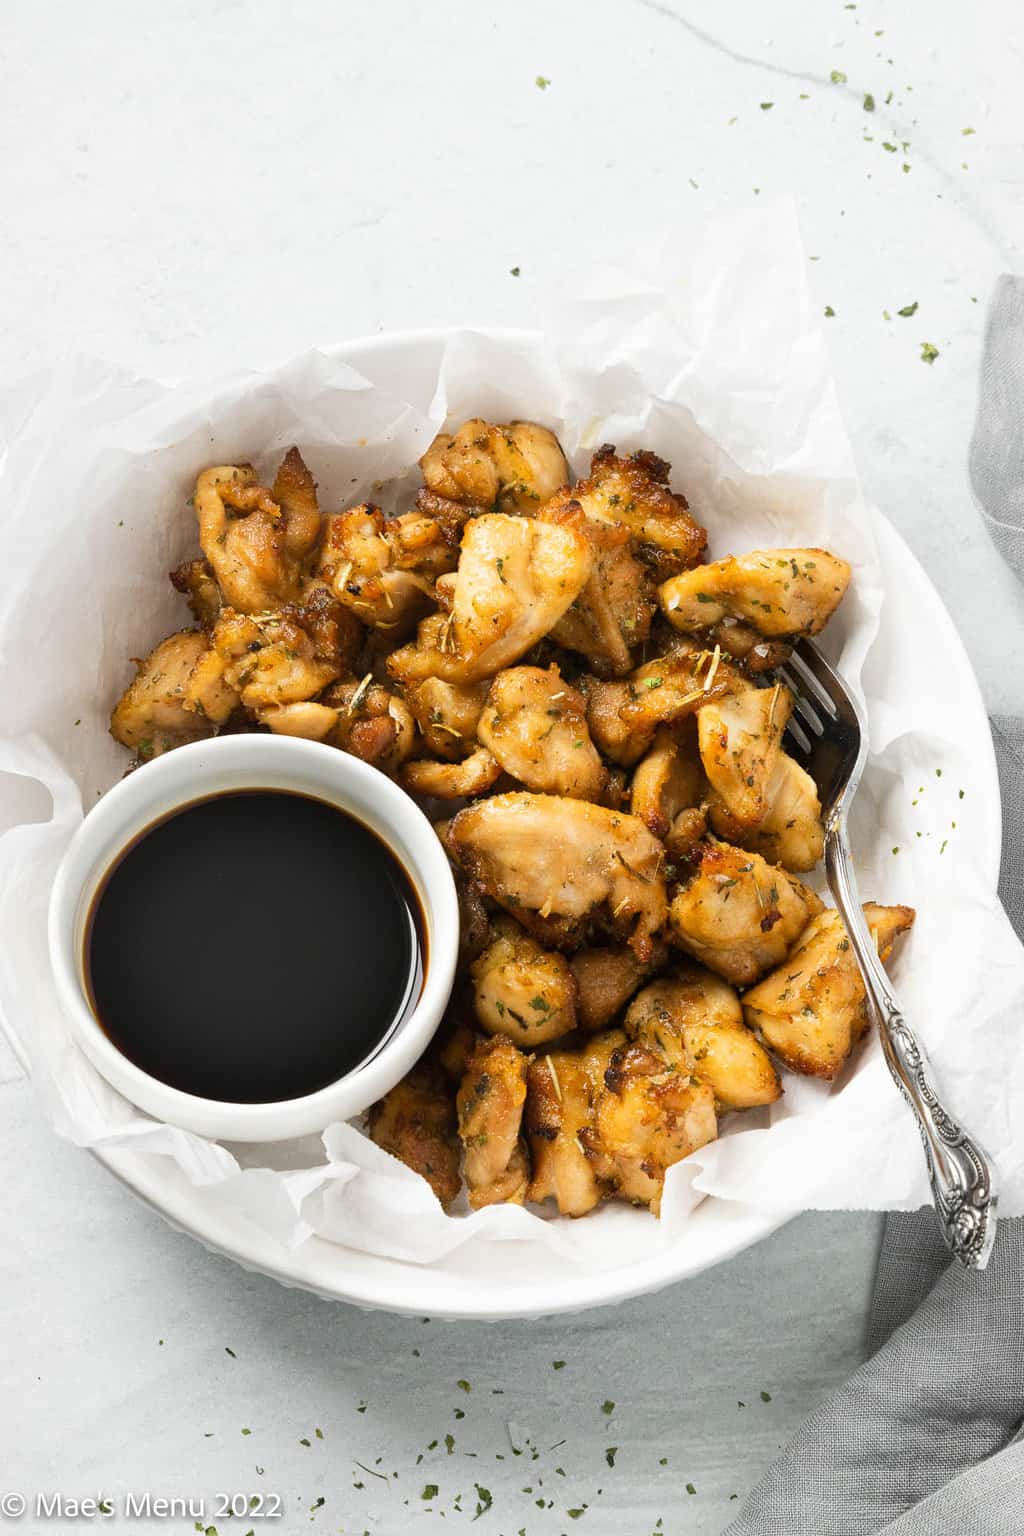 A parchment paper lined bowl of air fryer chicken bites with a small dipping dish of soy sauce.